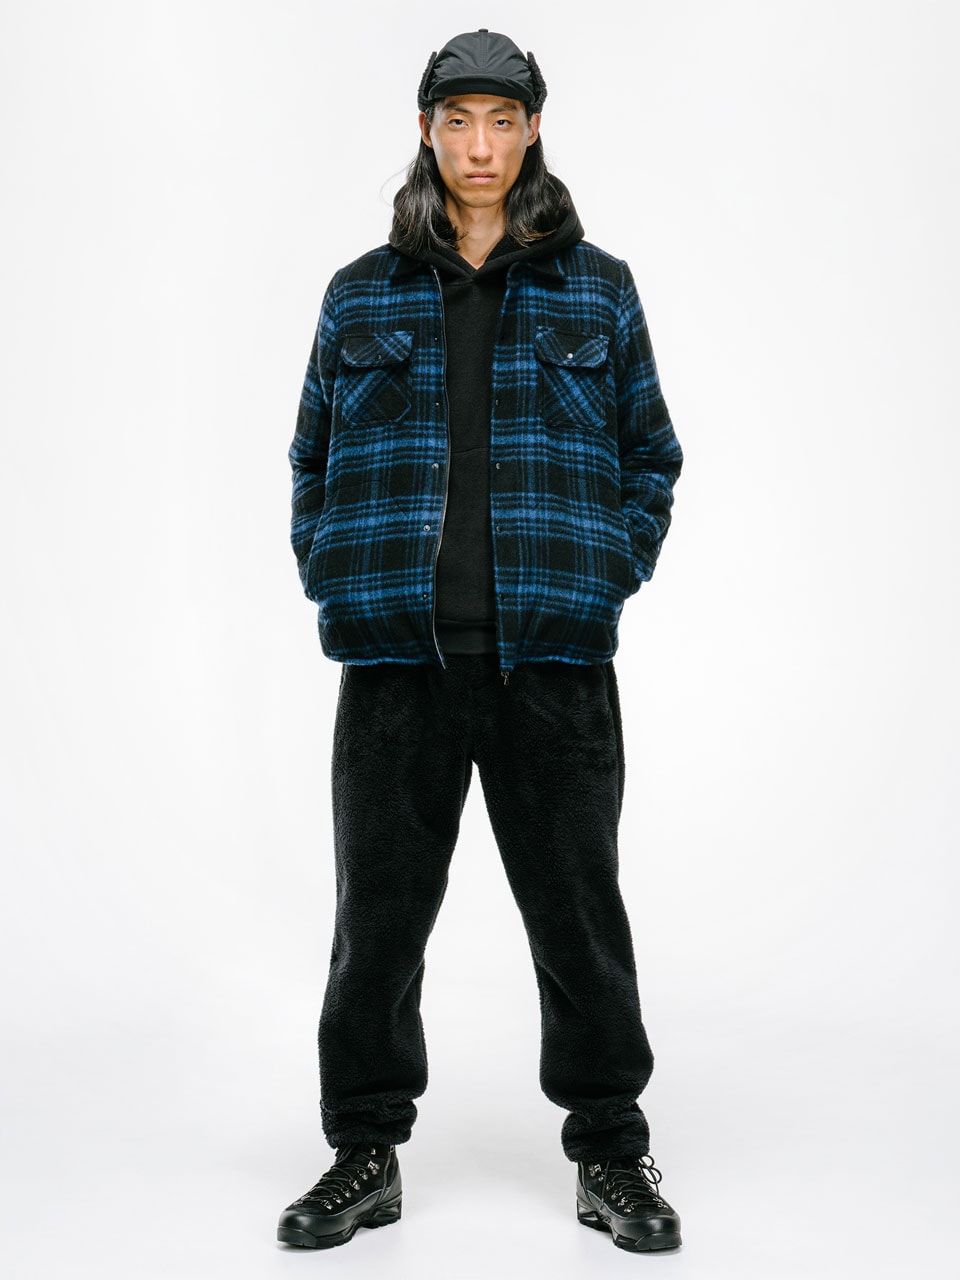 HAVEN Focuses on Performance and Utility With Its FW21 Collection Fashion 